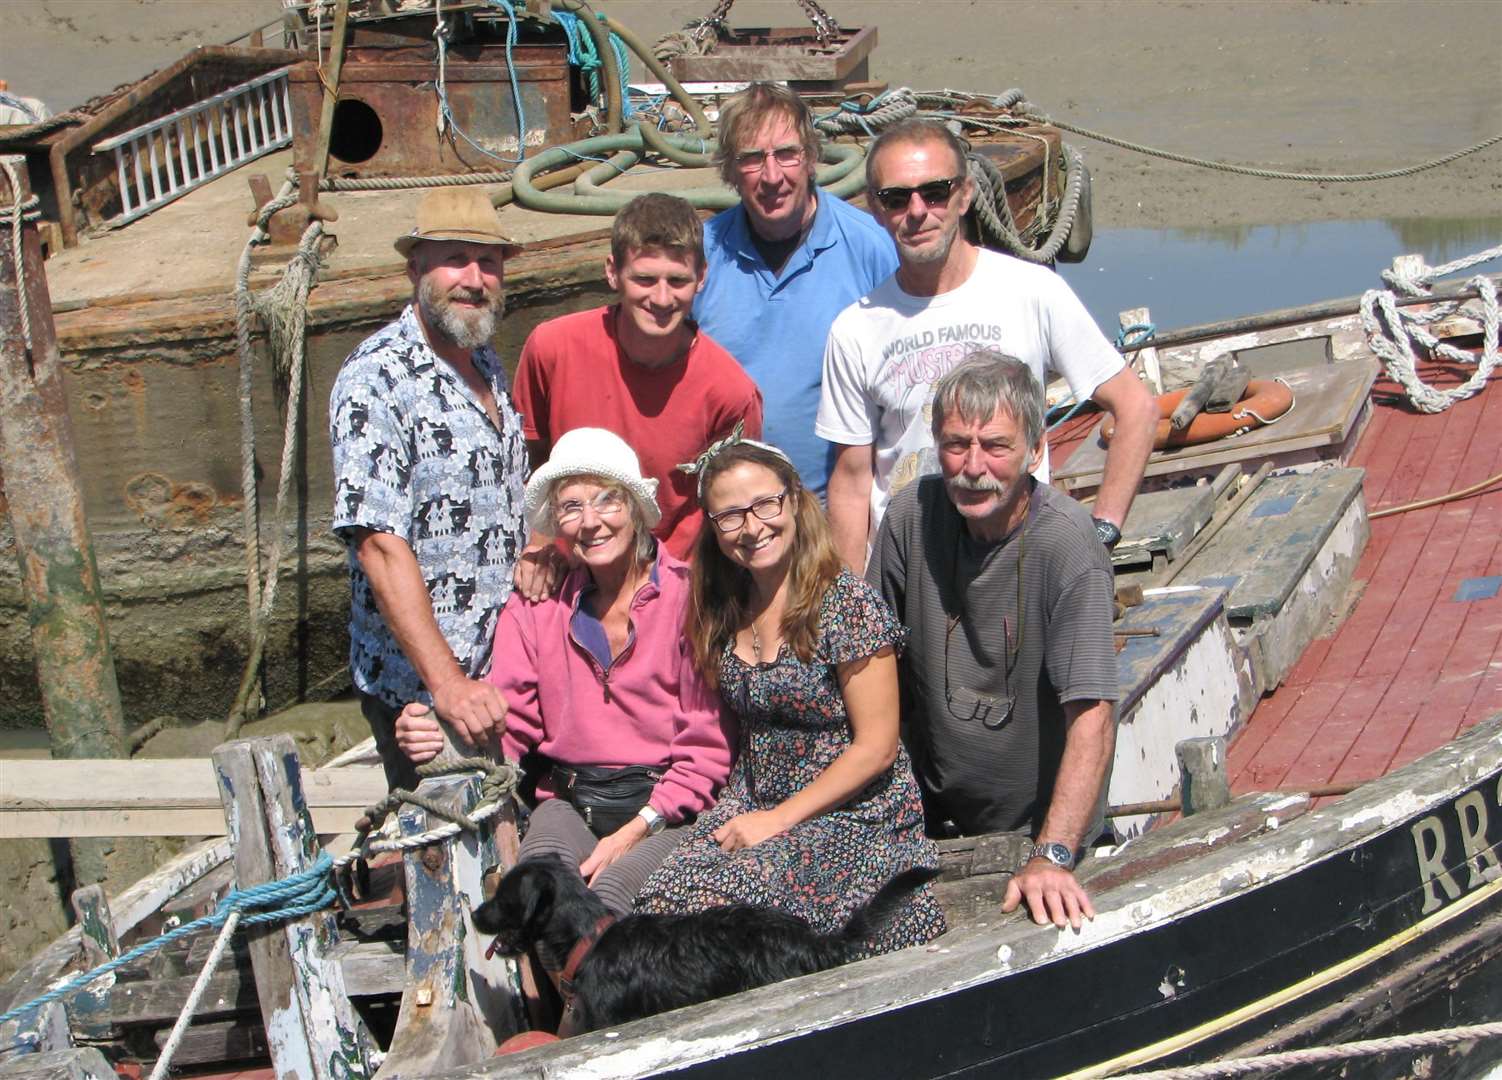 A save haven for Thistle at Faversham where she is being restored by (clockwise from top left) Ian Reekie, Morgan Lewis, Kerry McSwain, Andy Reeve, Bob Berk, Victoria Shorland and Lena Reekie